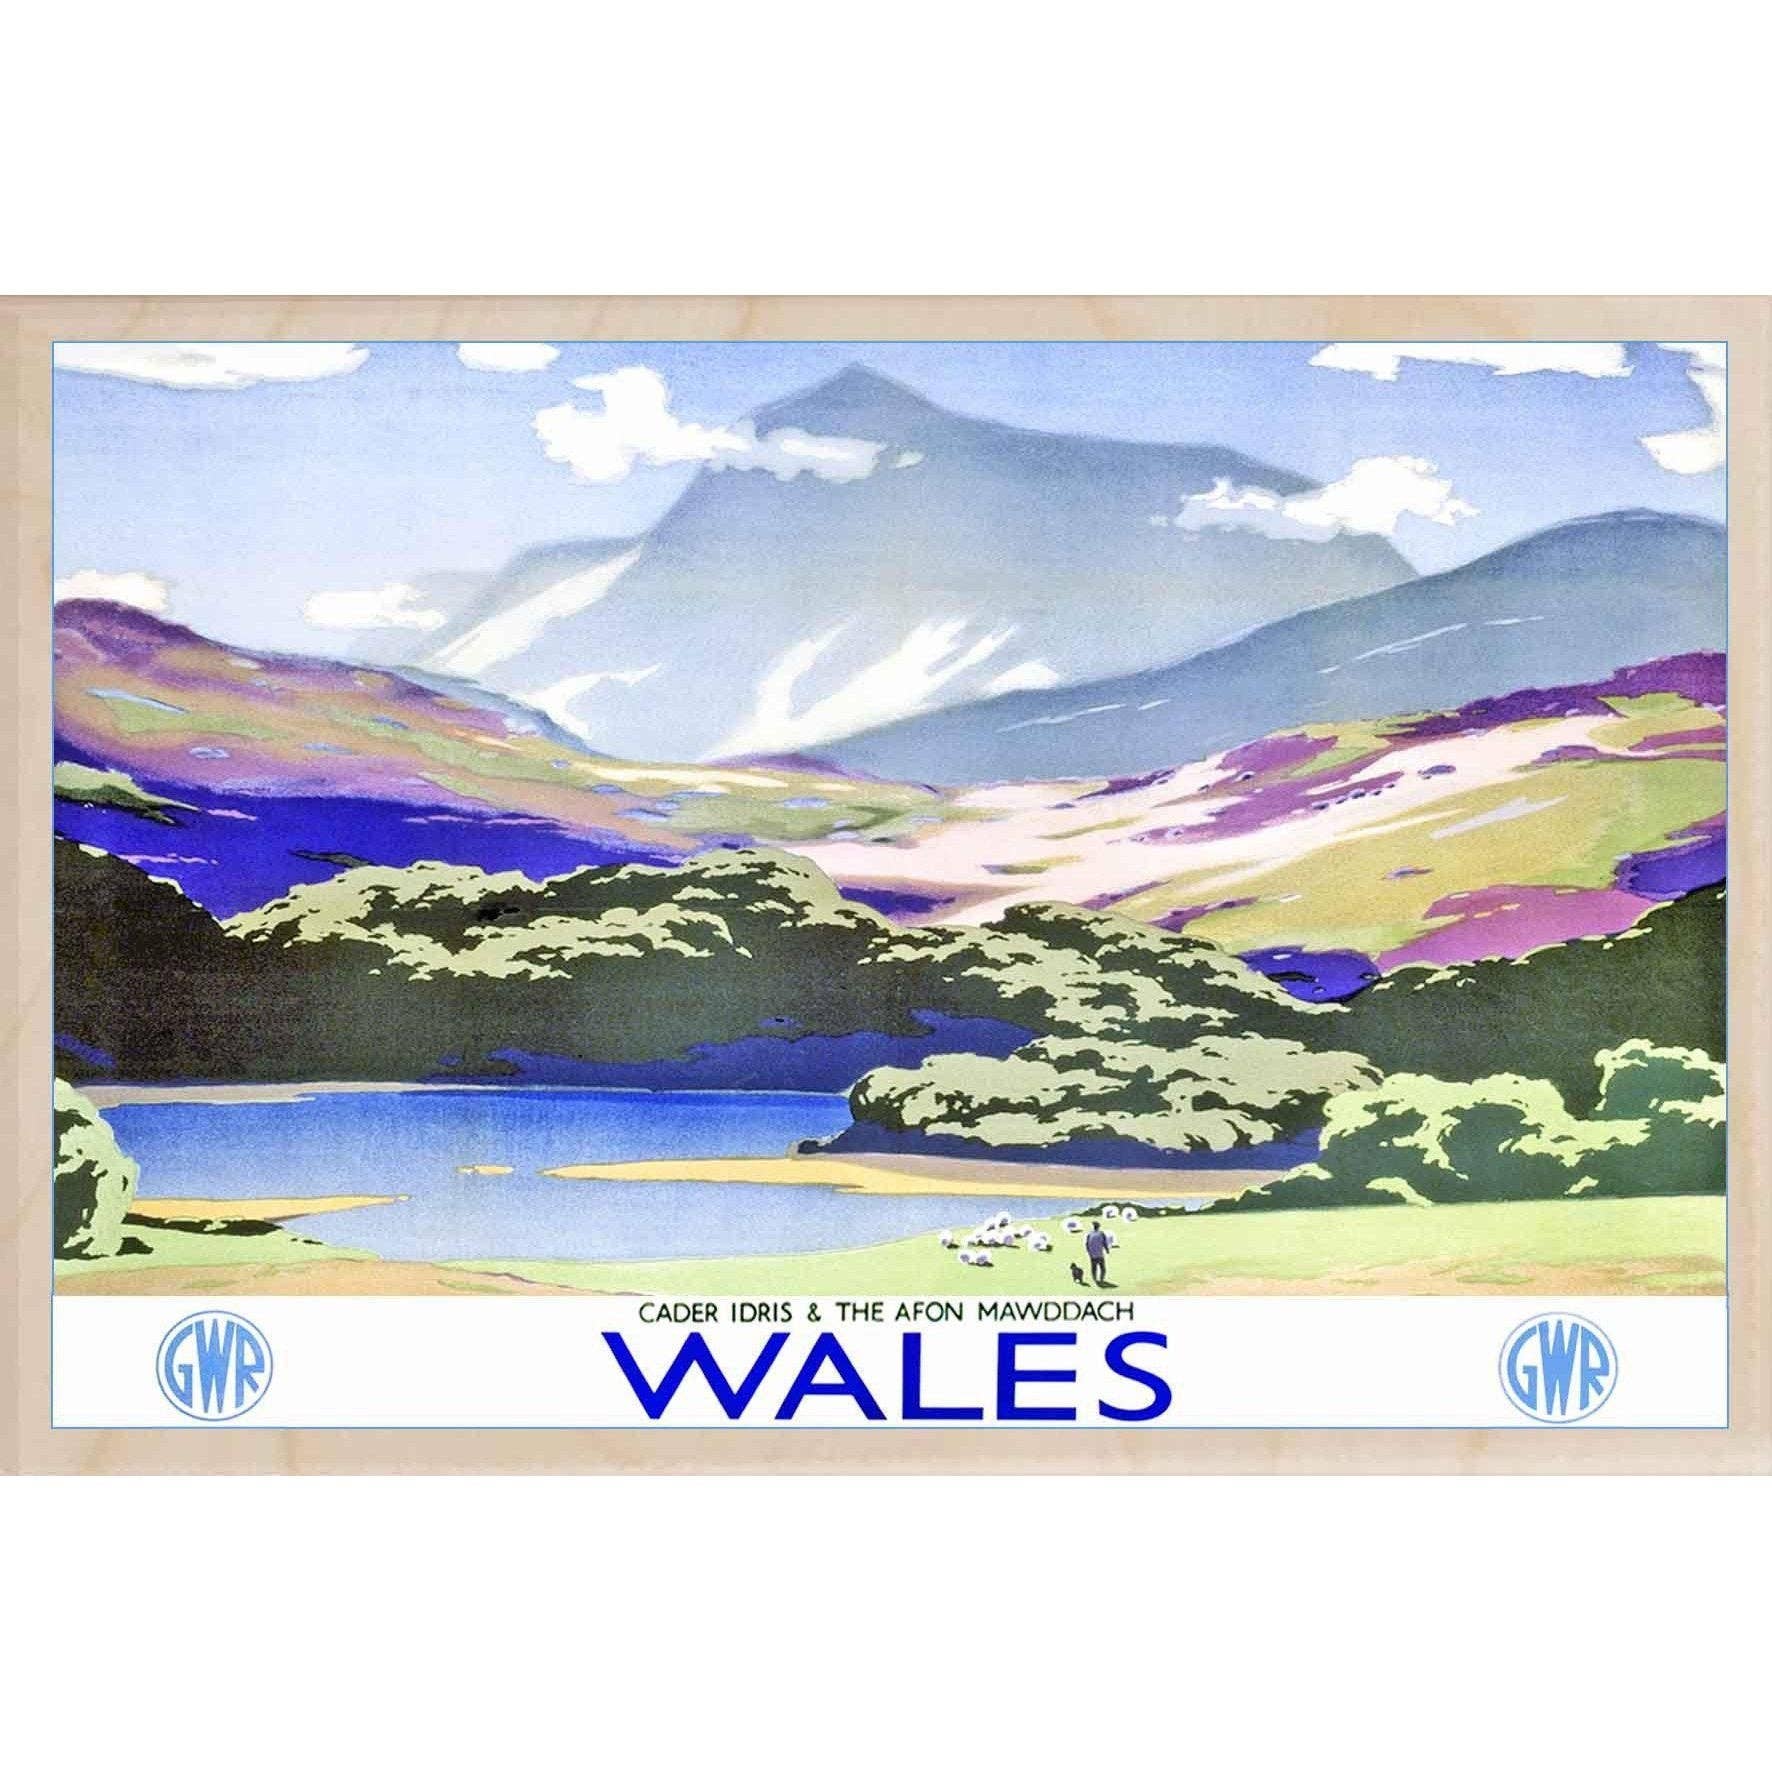 Cader Idris and the Afon Mawddach Wales Sustainable Wood Wooden Postcard